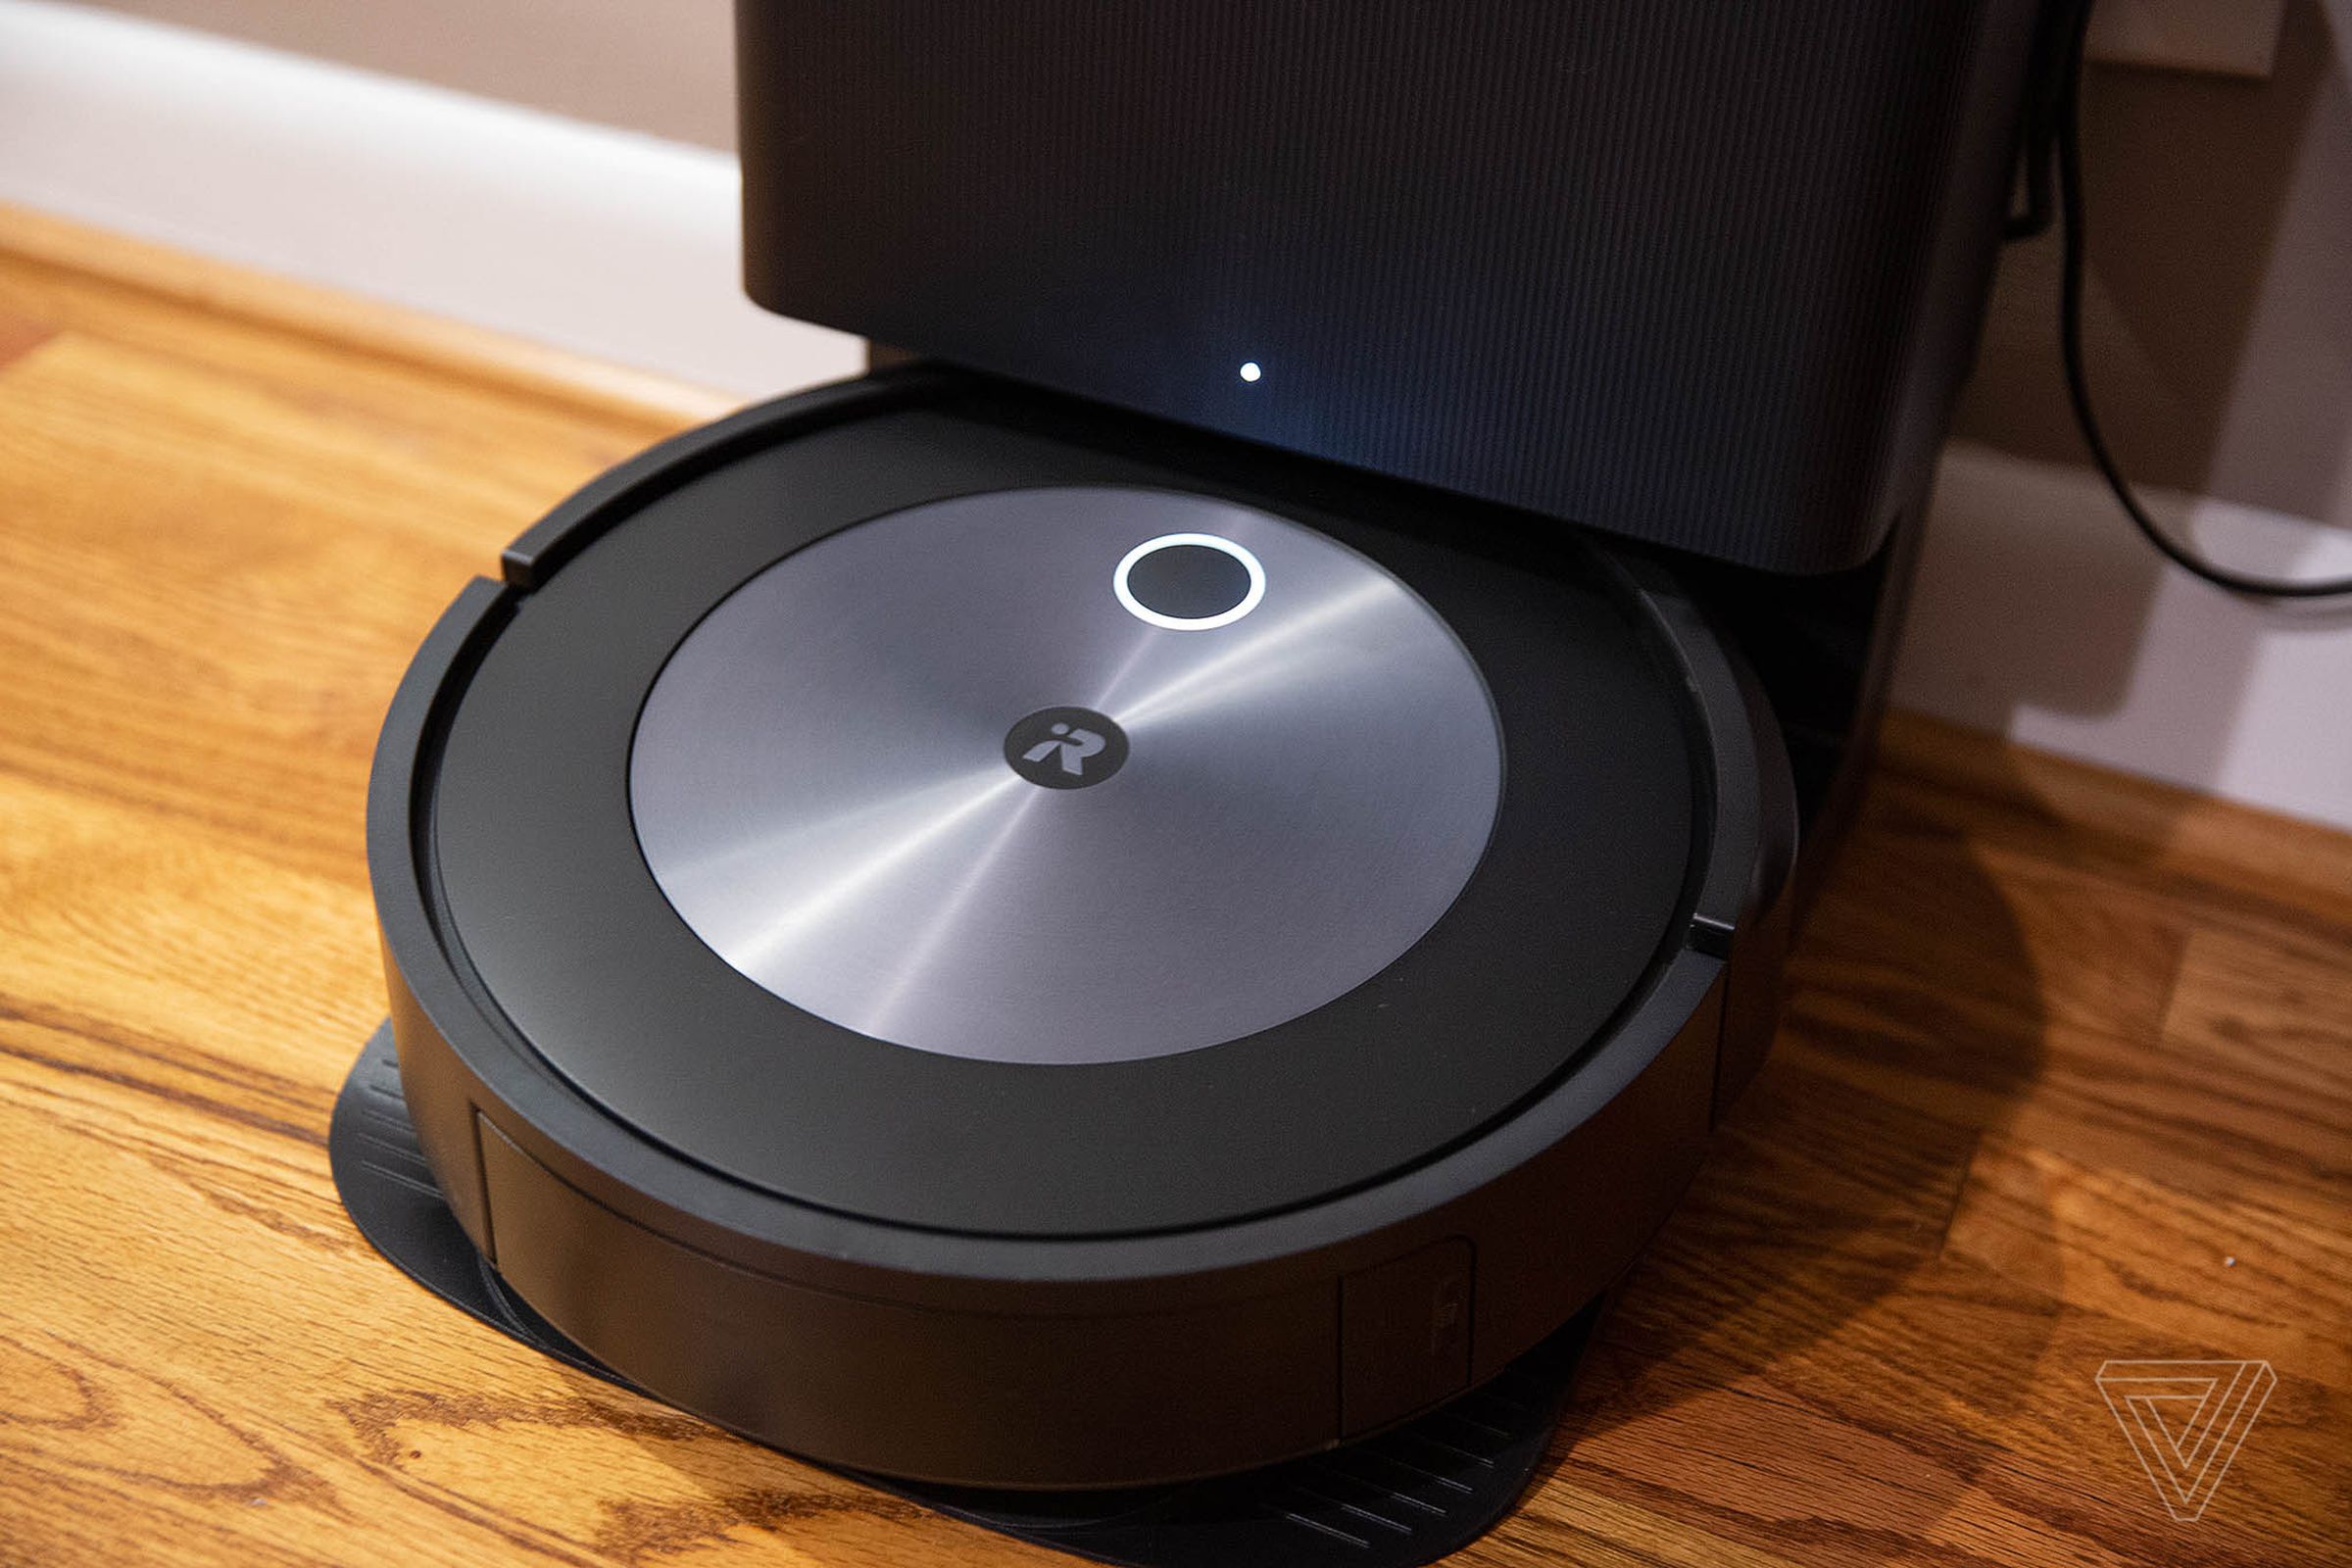 The iRobot Roomba j7 impressed us with its cleaning capabilities.